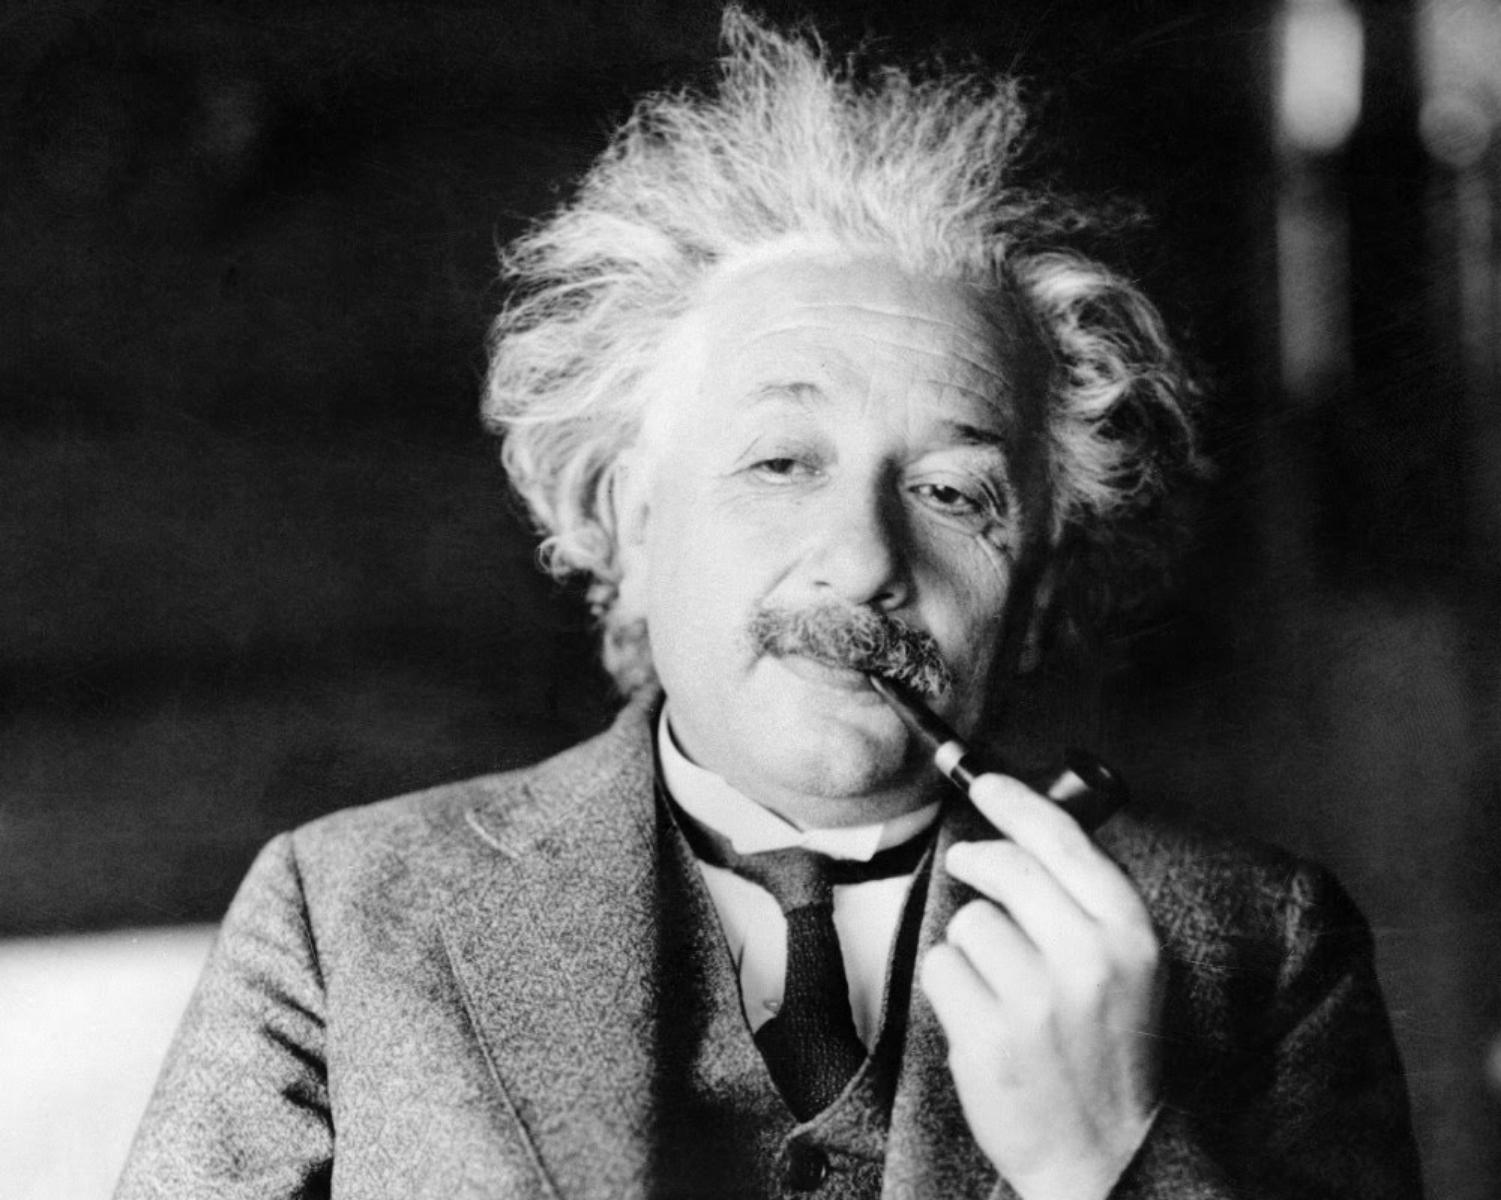 Who came up with the theory of relativity?